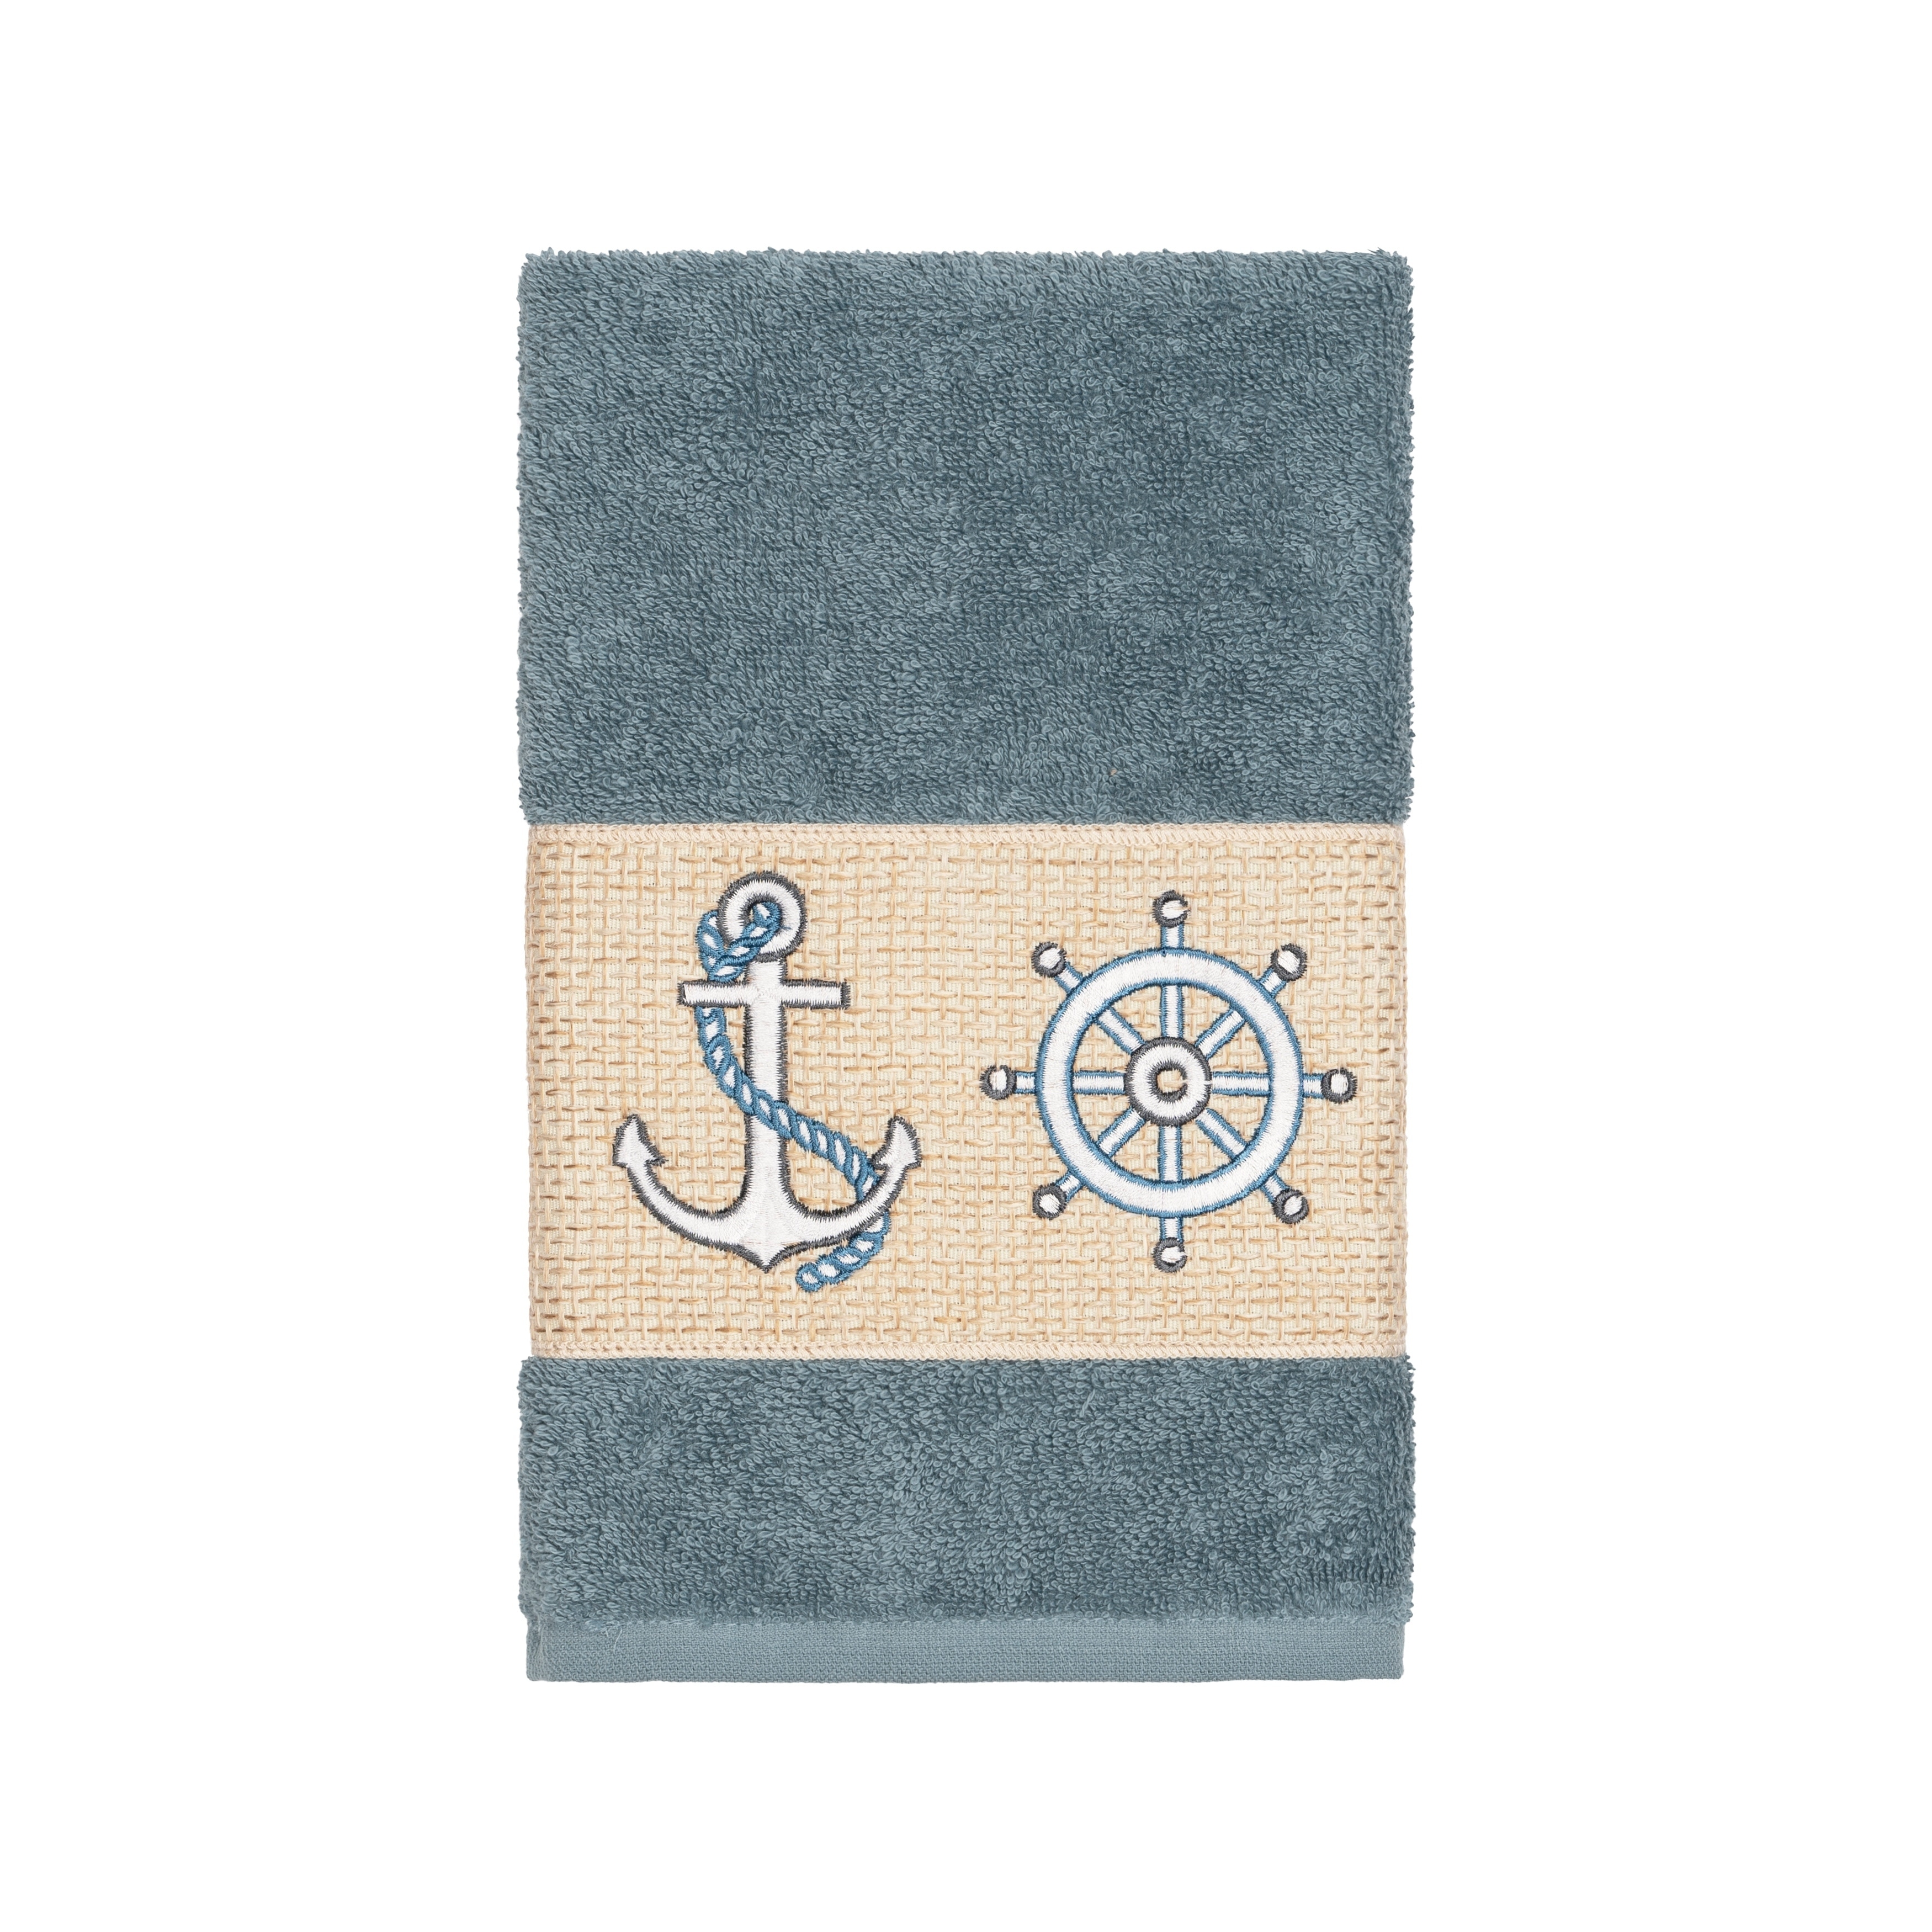 https://ak1.ostkcdn.com/images/products/22355550/Authentic-Hotel-and-Spa-Turkish-Cotton-Nautical-Embroidered-Teal-Blue-Hand-Towel-4b2a8b8a-c4cf-4af3-96f3-dcd0a1074b9d.jpg